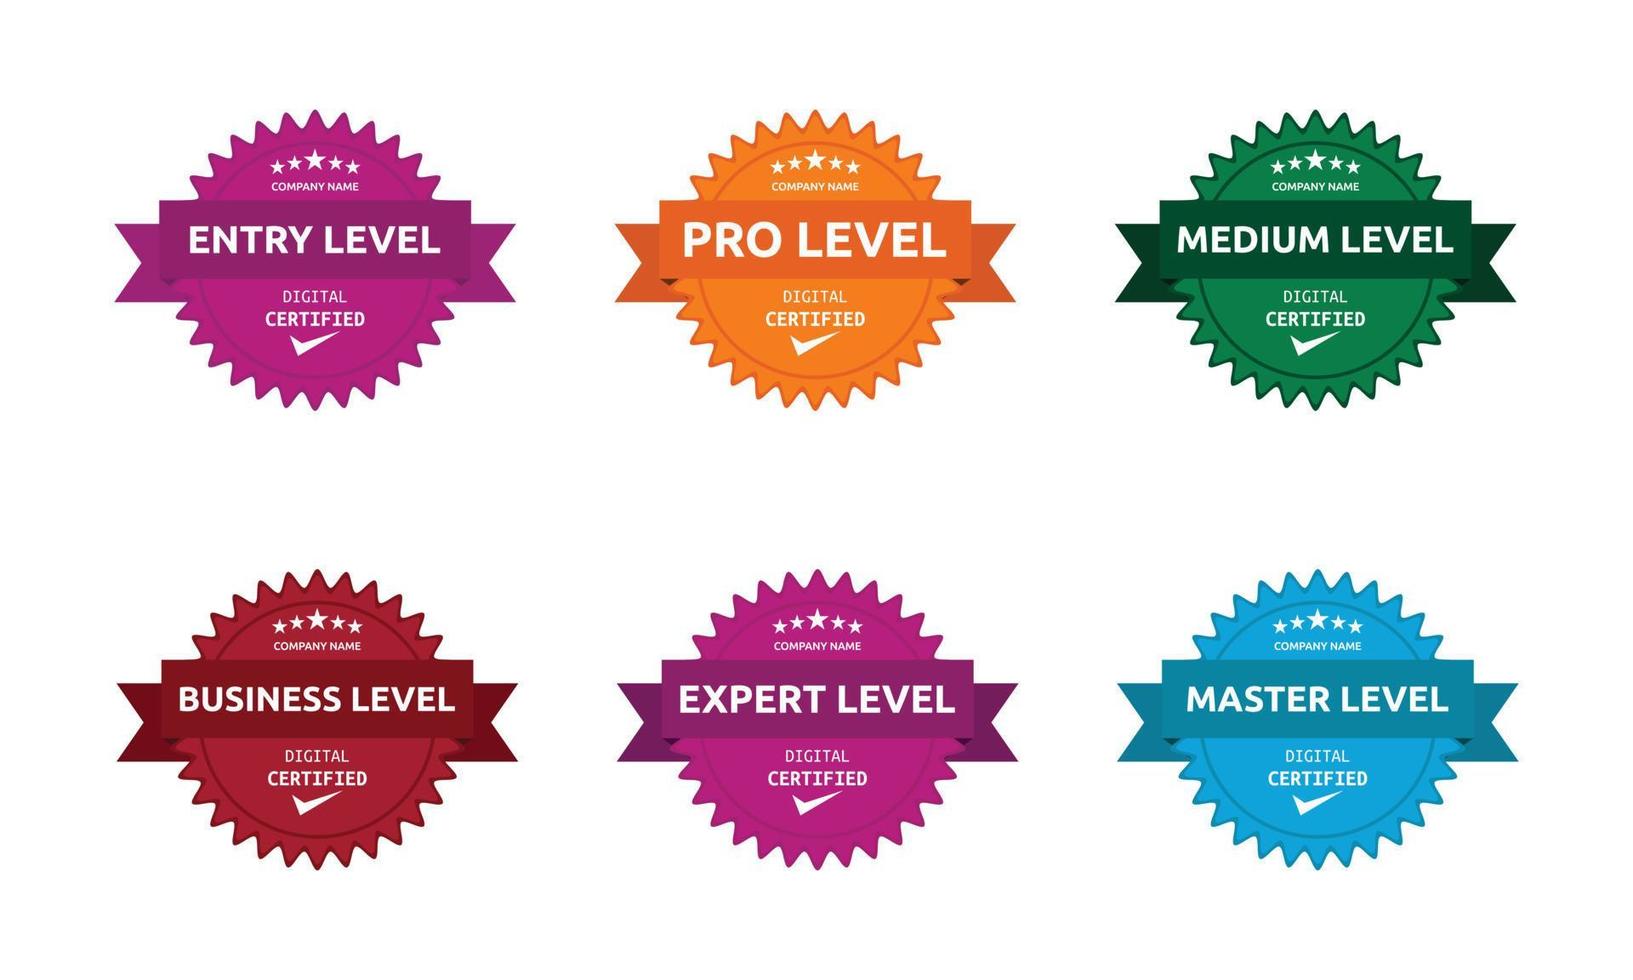 Organization Training Certification Badge Set, Certified Stamp For Company Members on Different Levels Seal With Premium Look vector